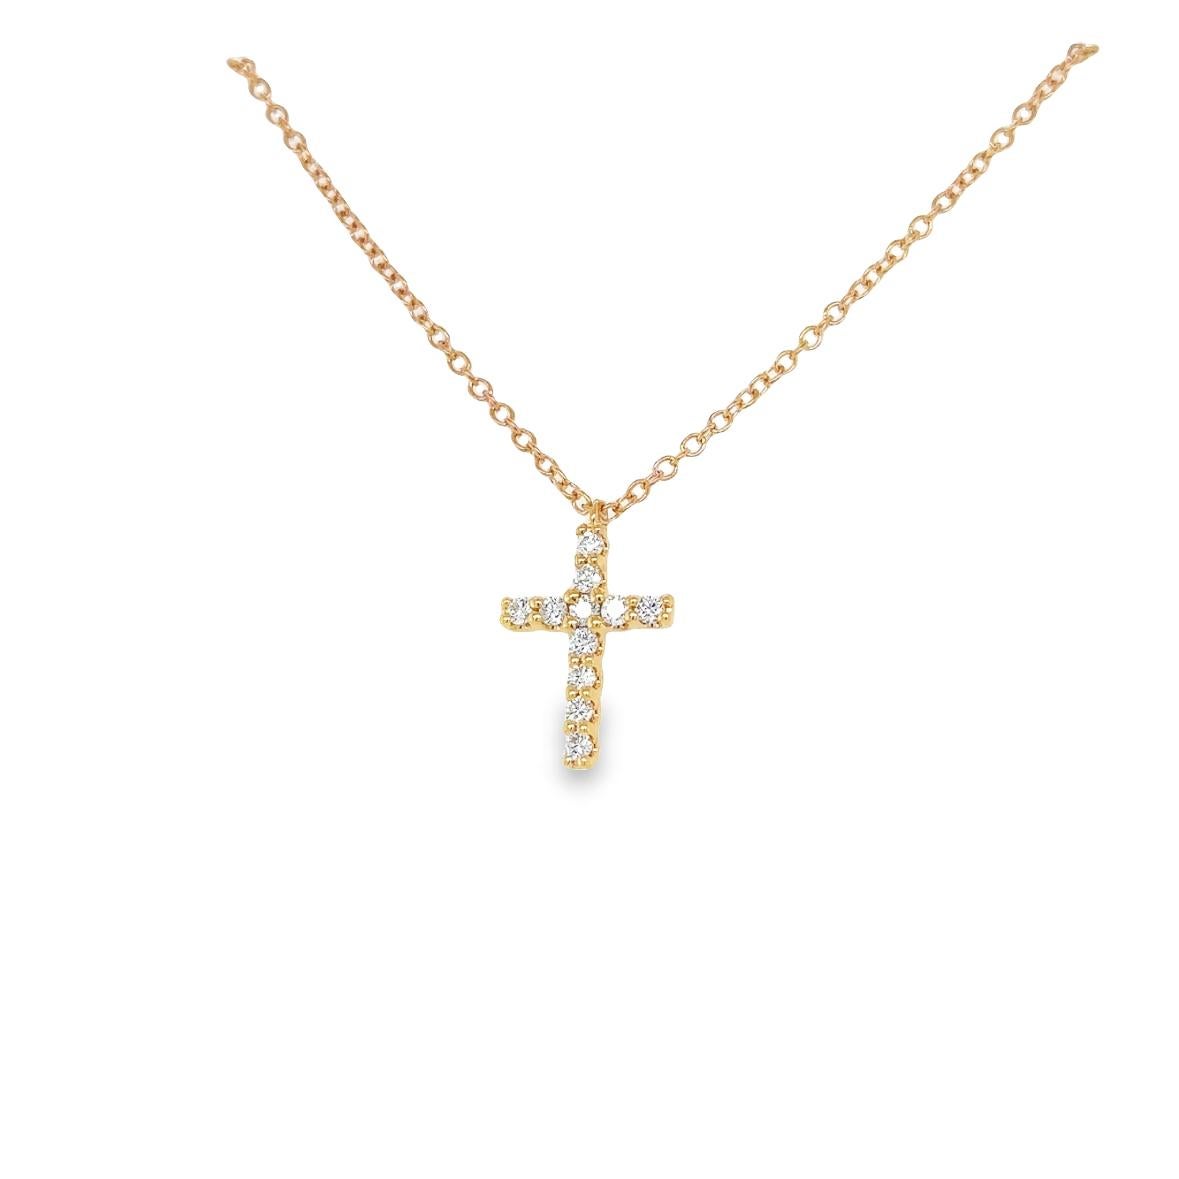 Introducing the TIMELESS Cross Necklace, elegantly crafted in 18Kt rose gold, with a weight of 4.07 grams. It features 11 Round Diamonds, each boasting a G color grade and VS clarity, with a total carat weight of 0.32.

The Timeless Collection was